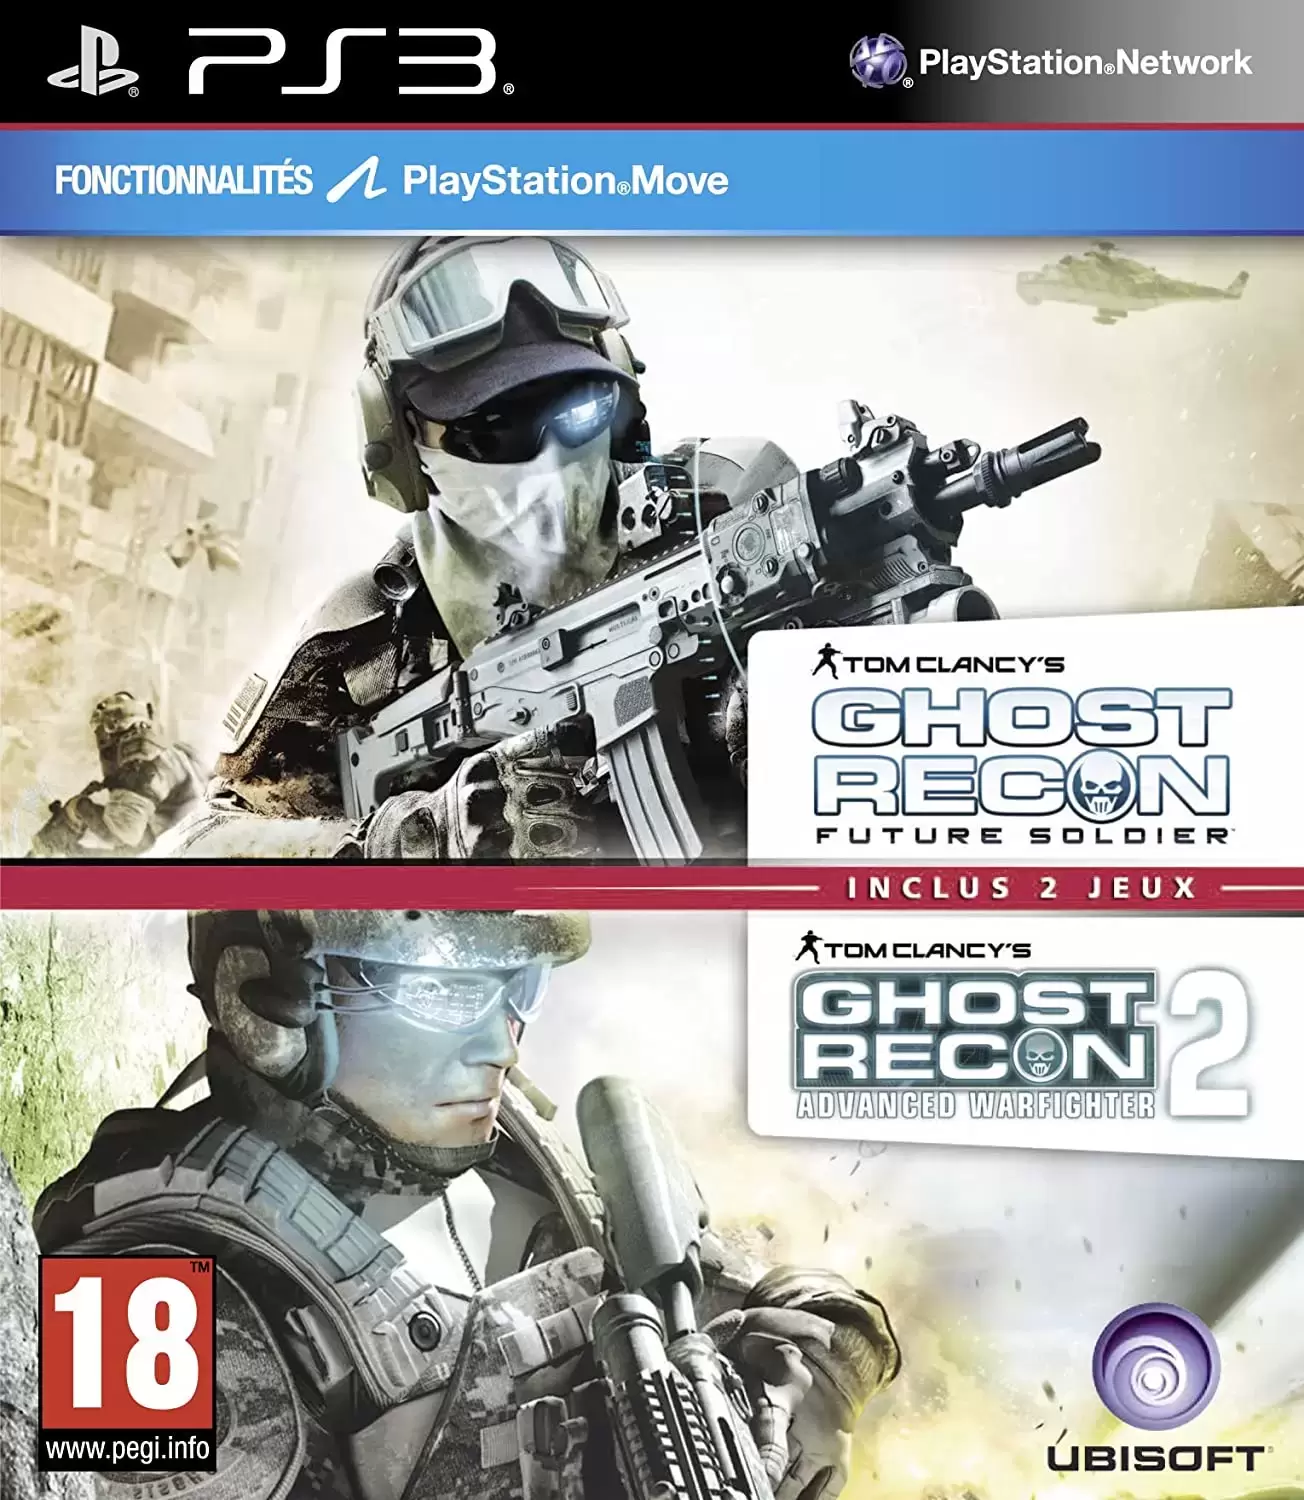 Jeux PS3 - Ghost Recon : Future Soldier + Ghost Recon : Advanced Warfighter 2